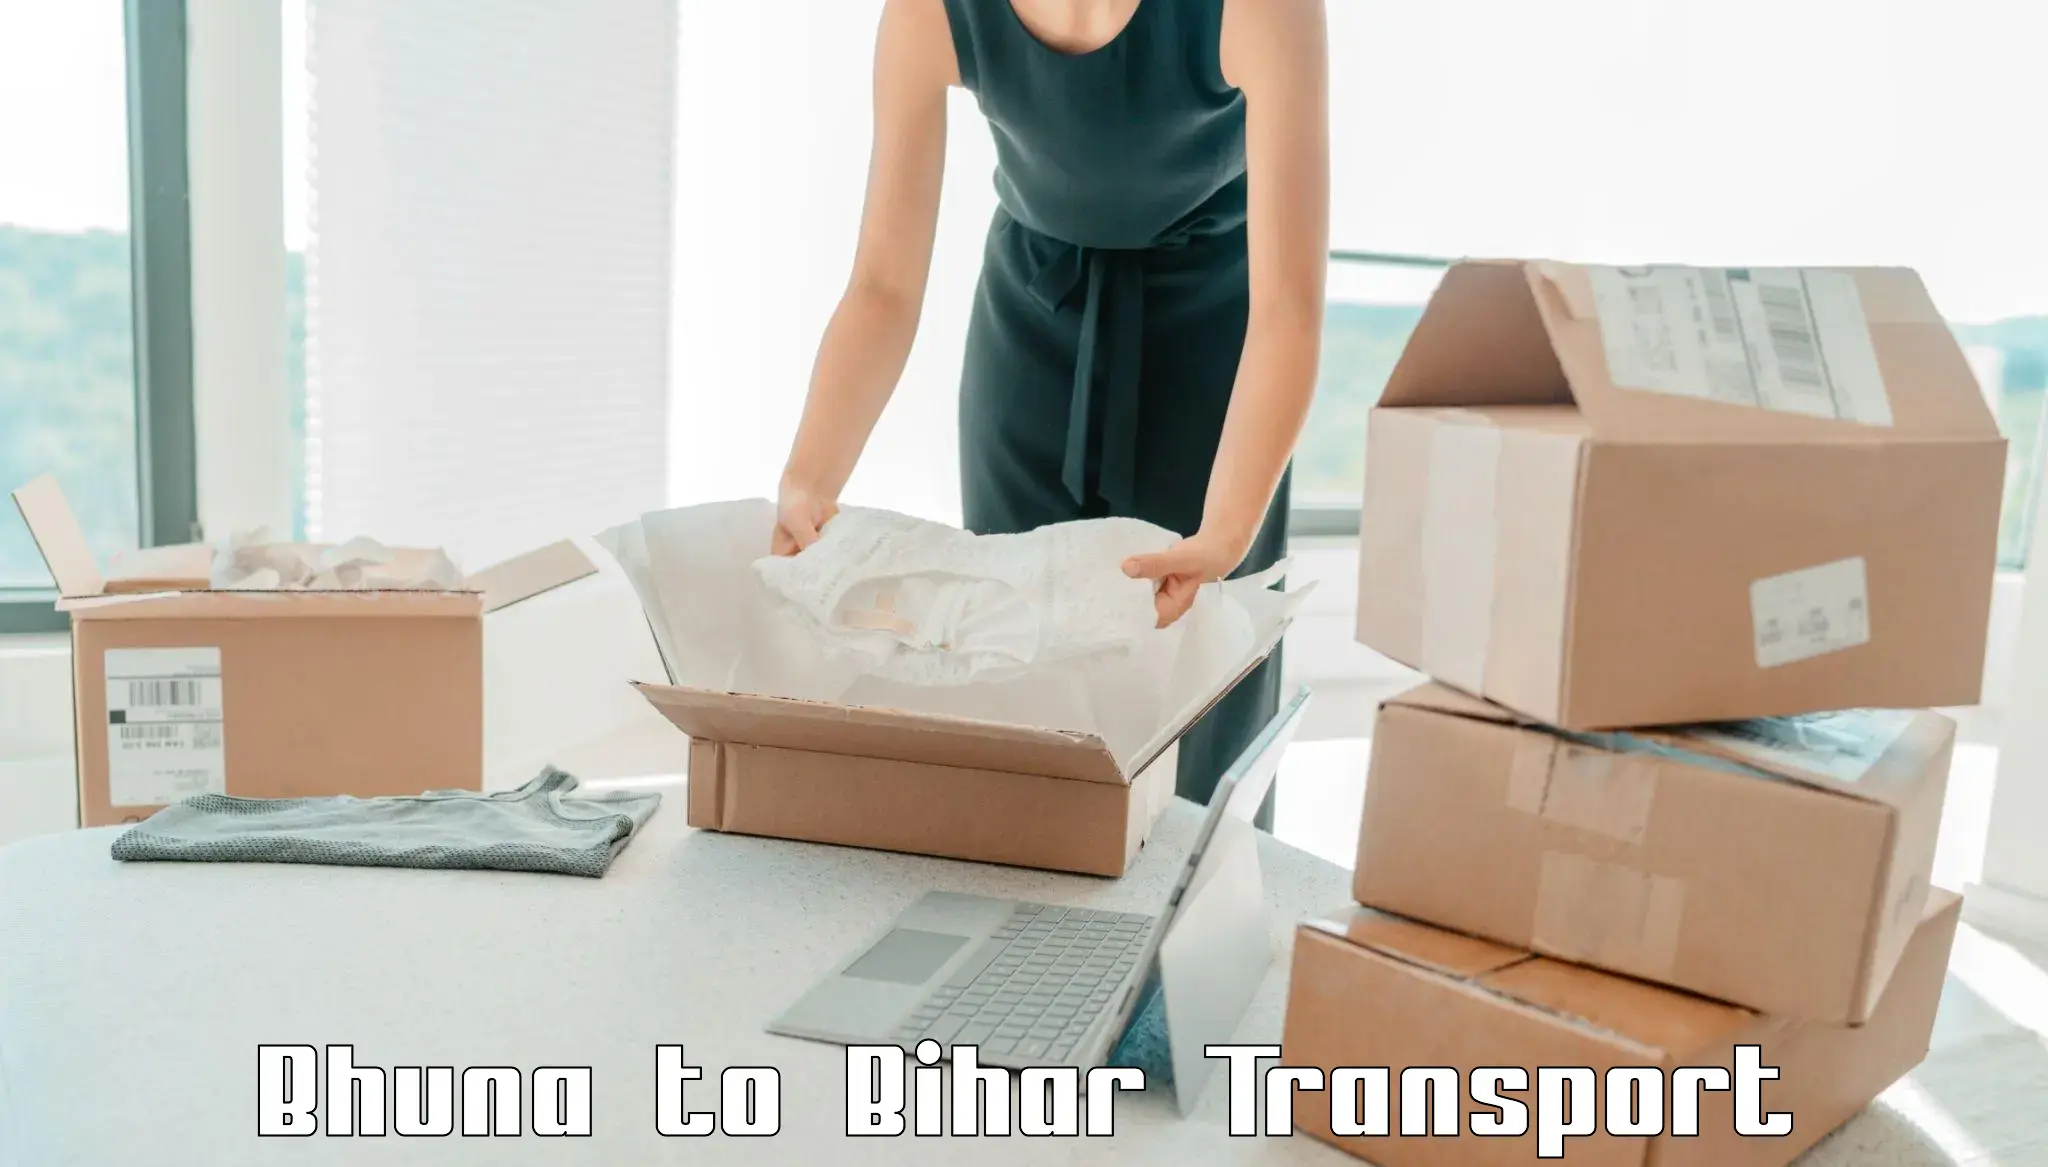 Express transport services Bhuna to Dhaka